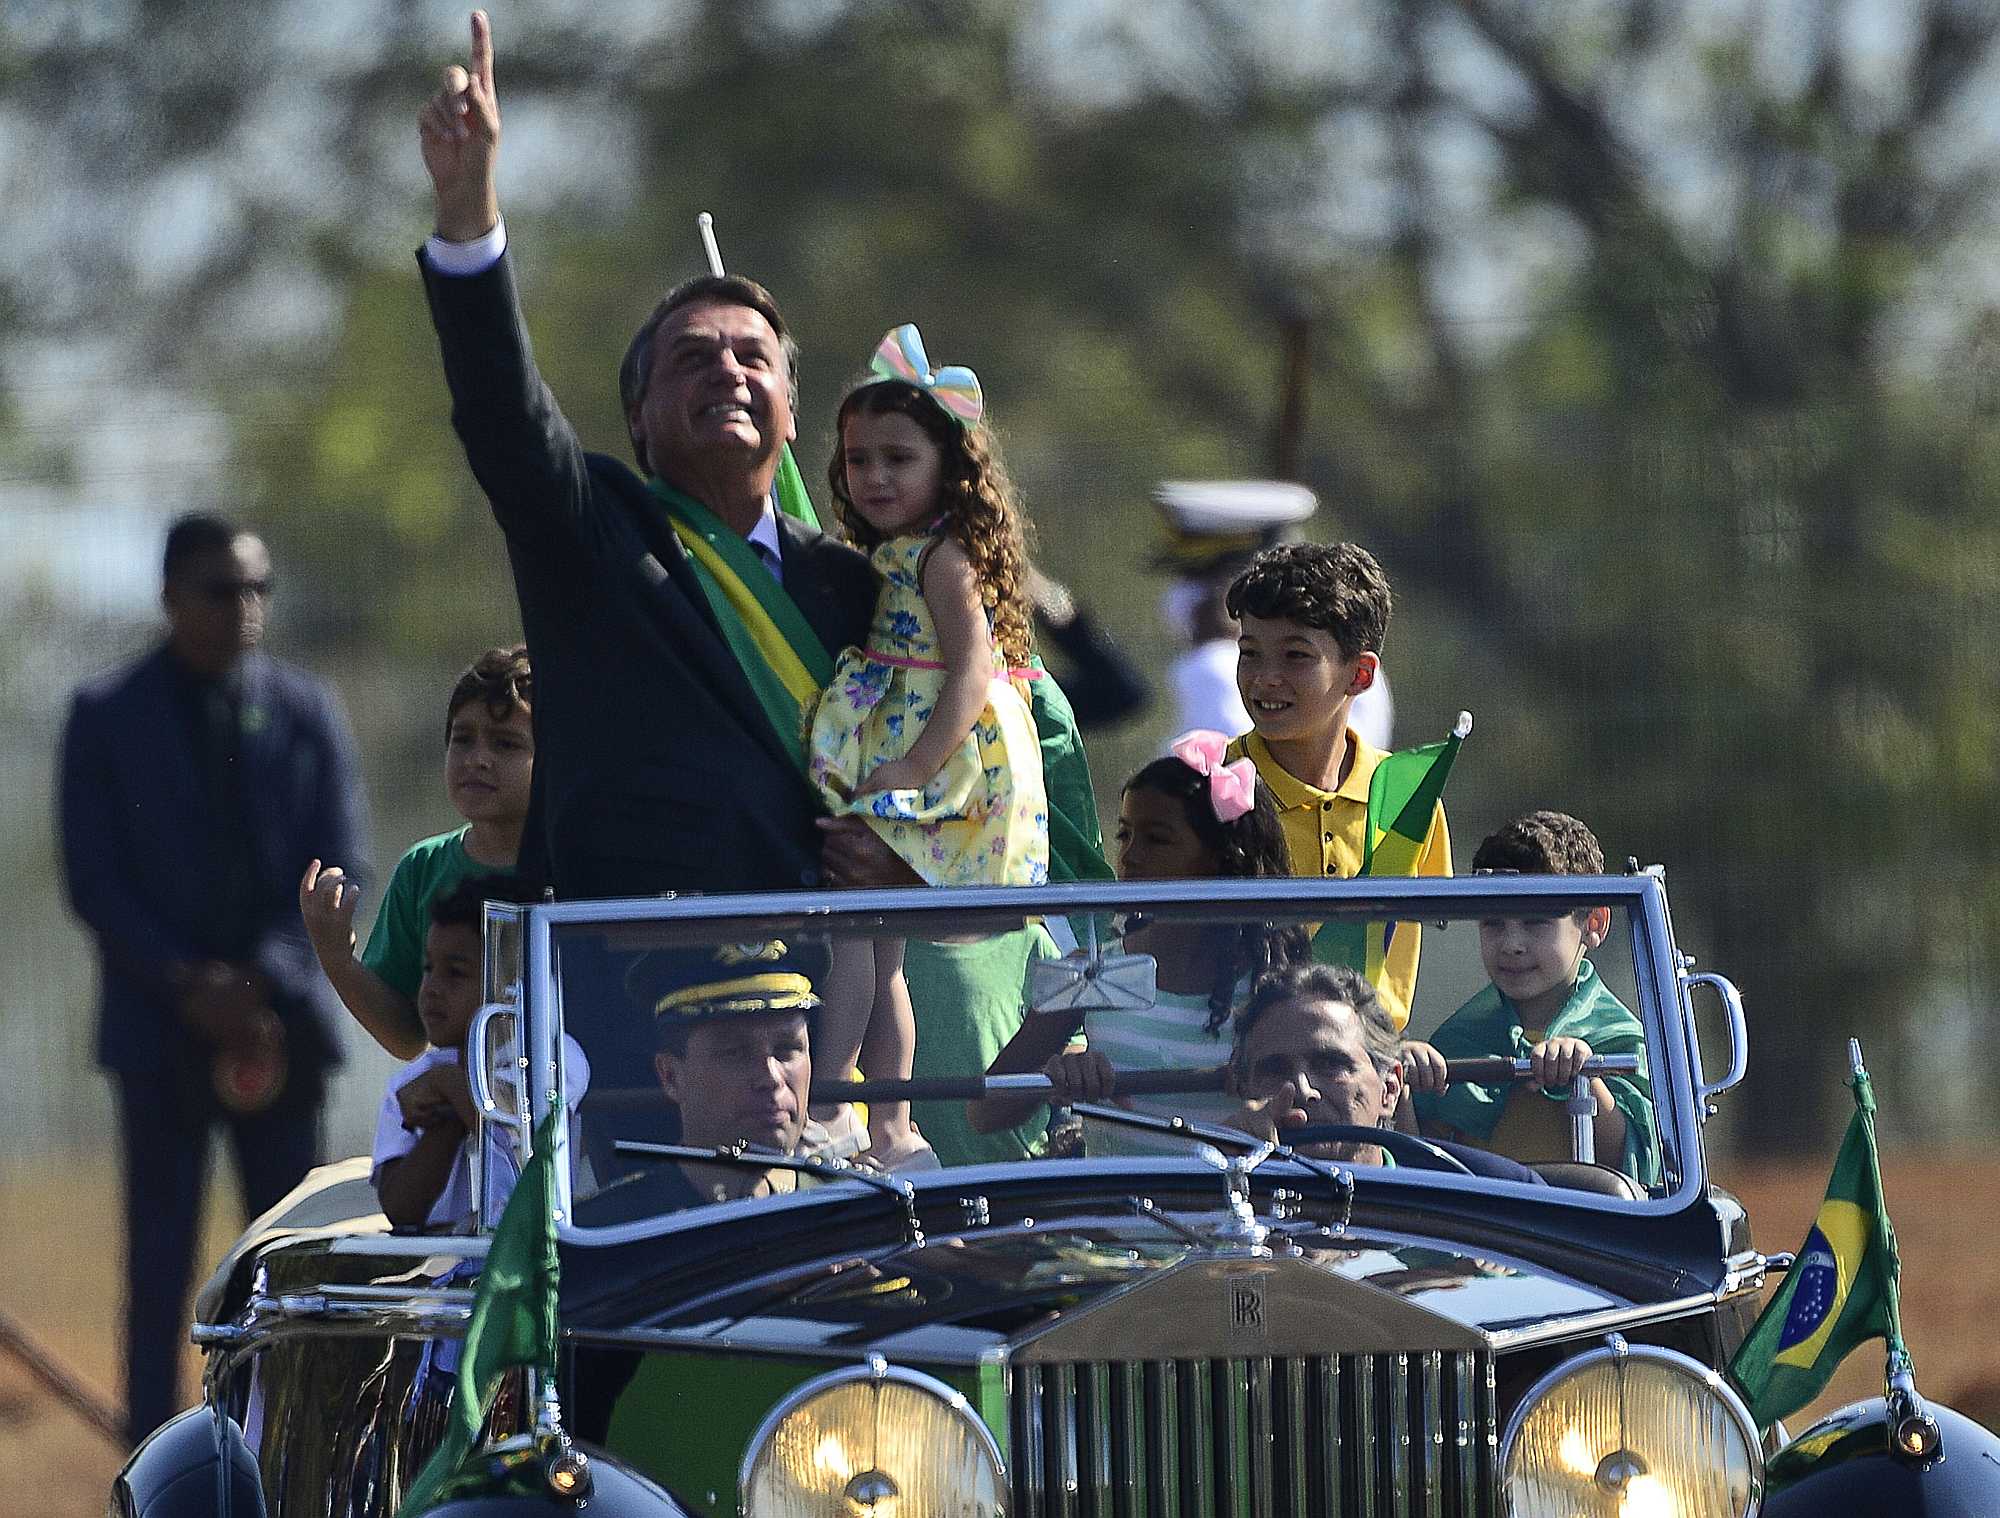 Bolsonaro in the presidential Rolls Royce with children, during the Independence Day celebrations - Marcelo Camargo / ABr